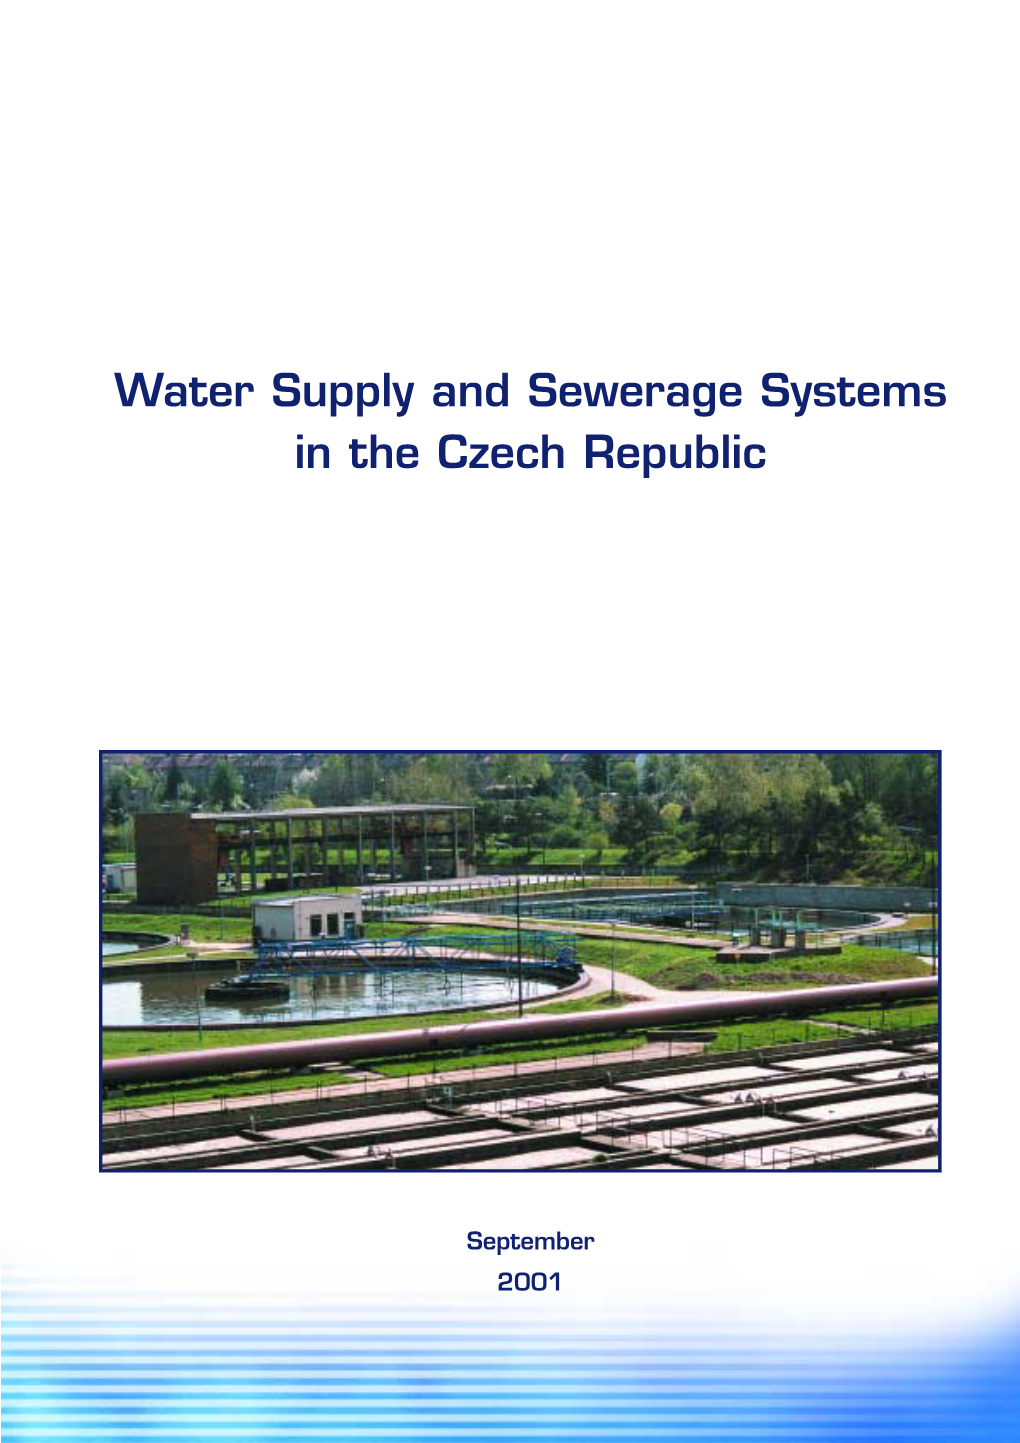 Water Supply and Sewerage Systems in the Czech Republic